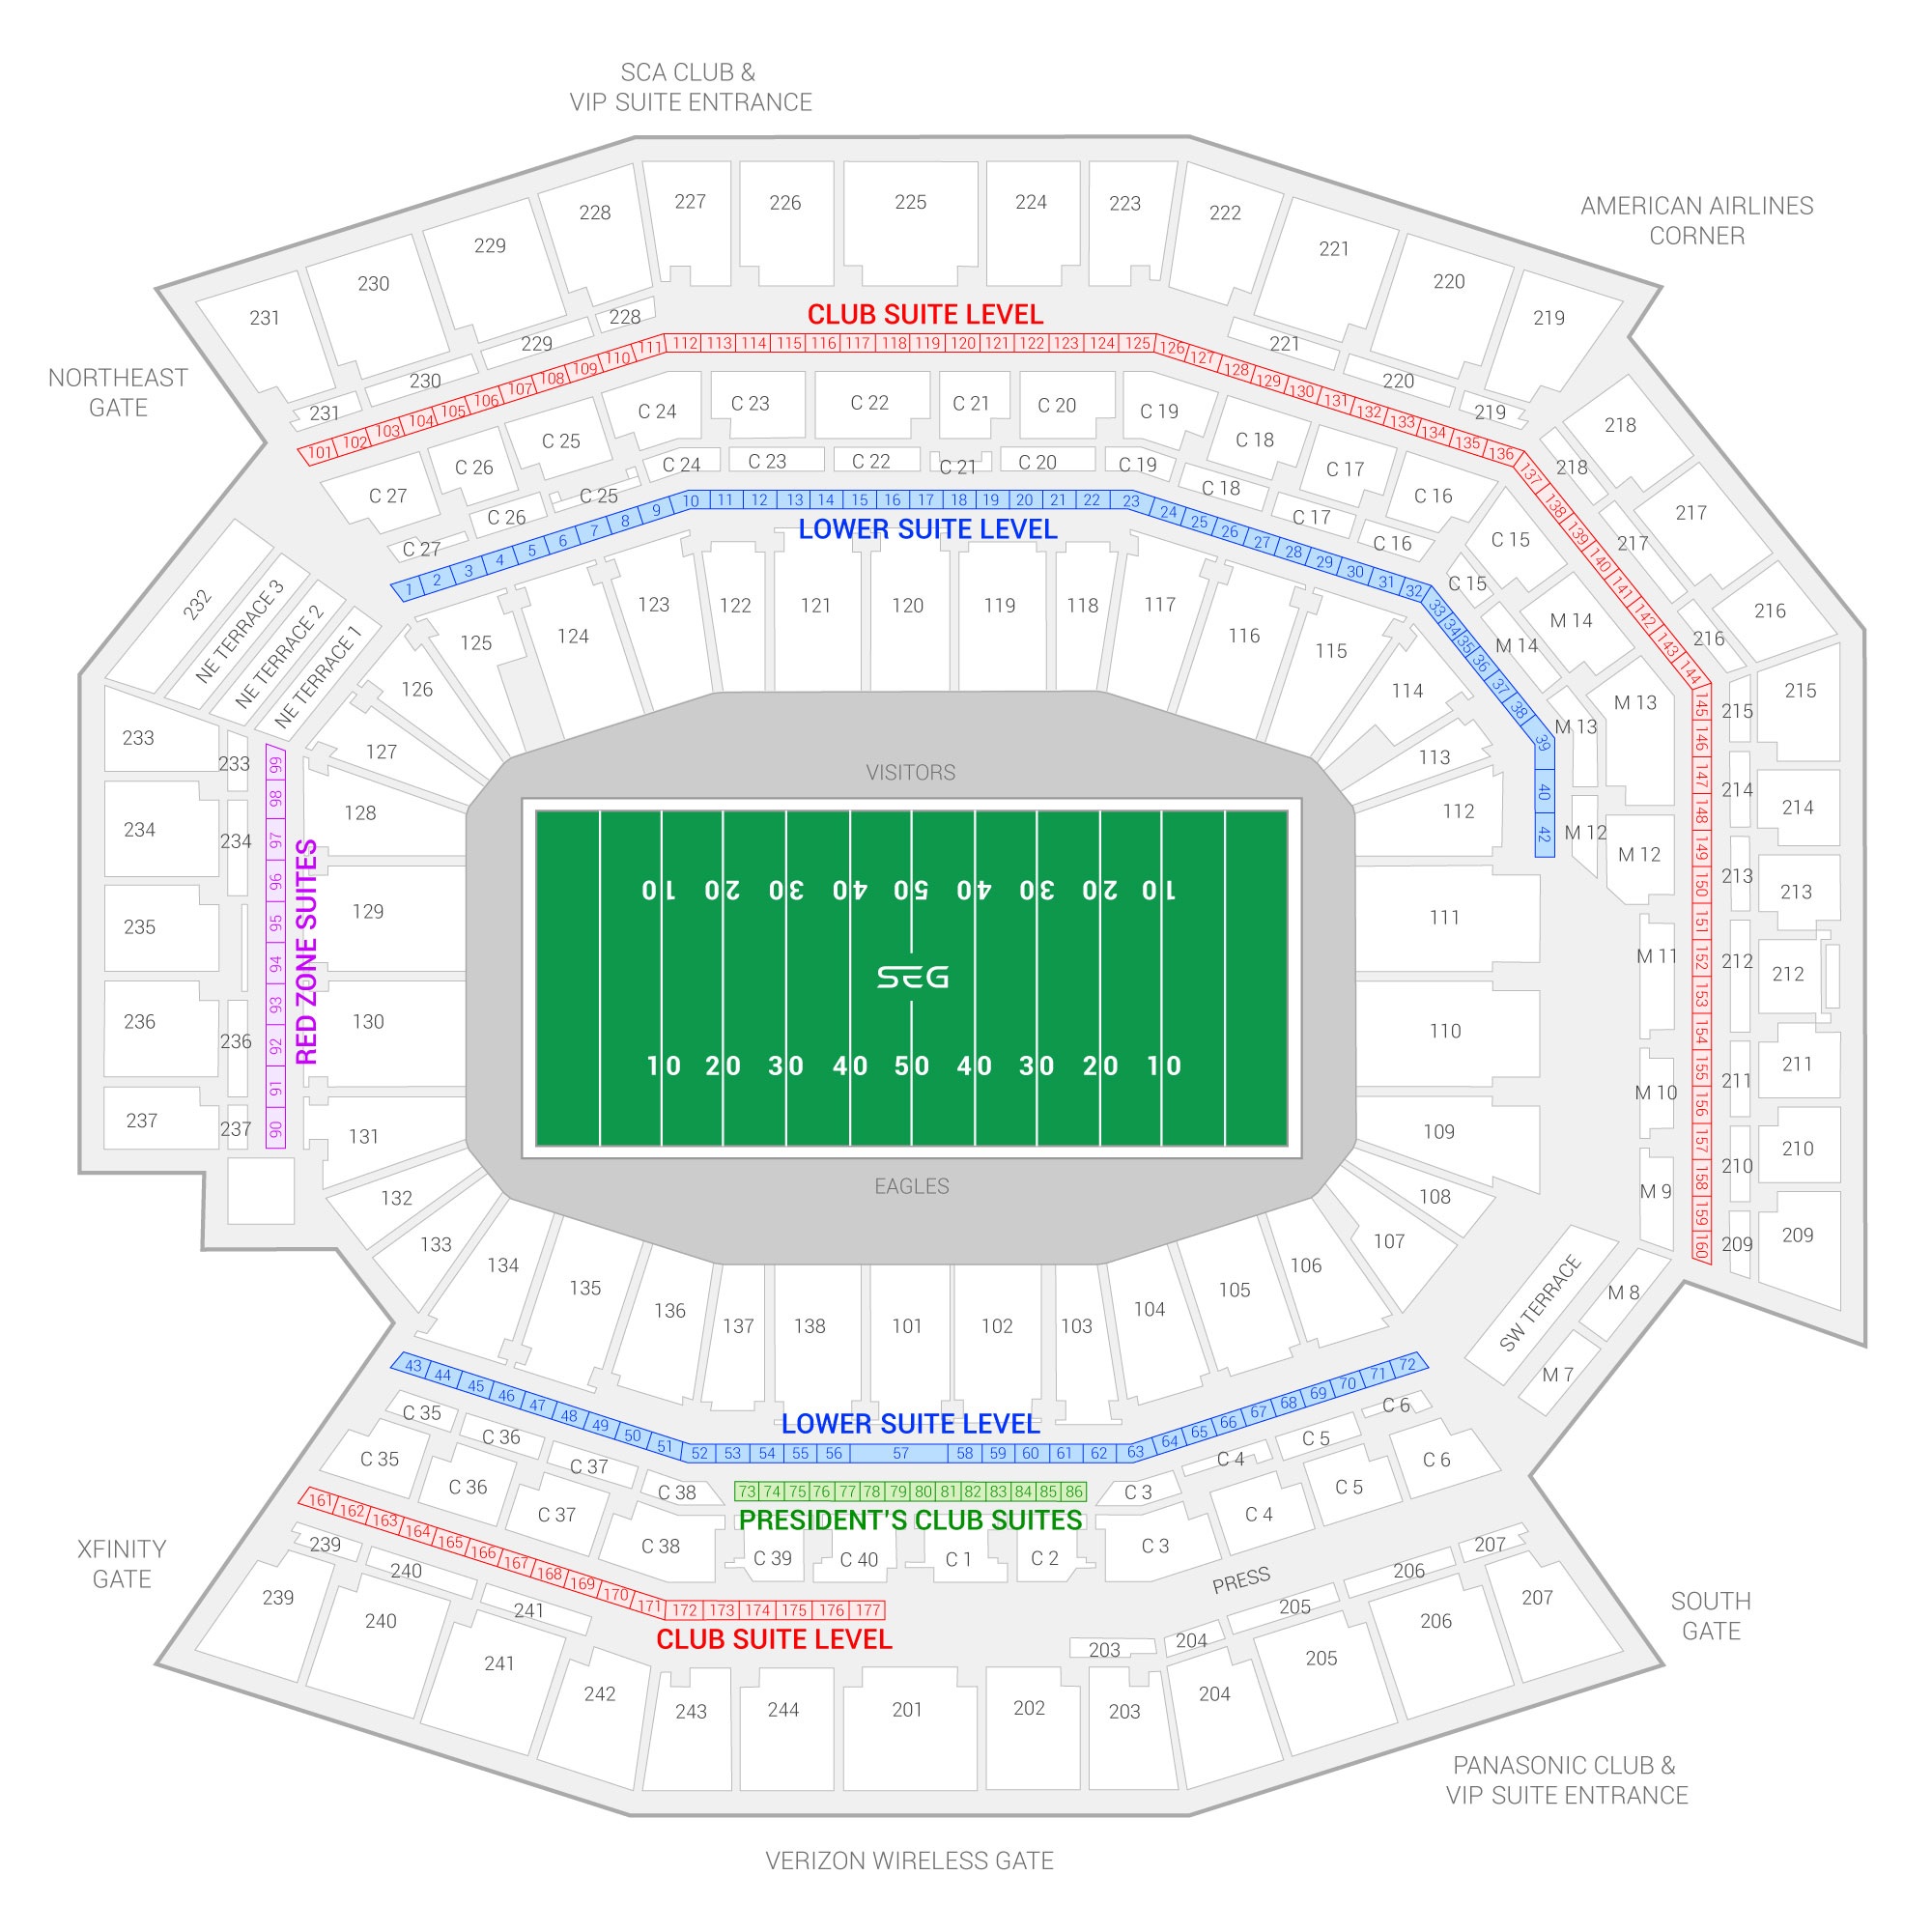 lincoln financial field concert tickets